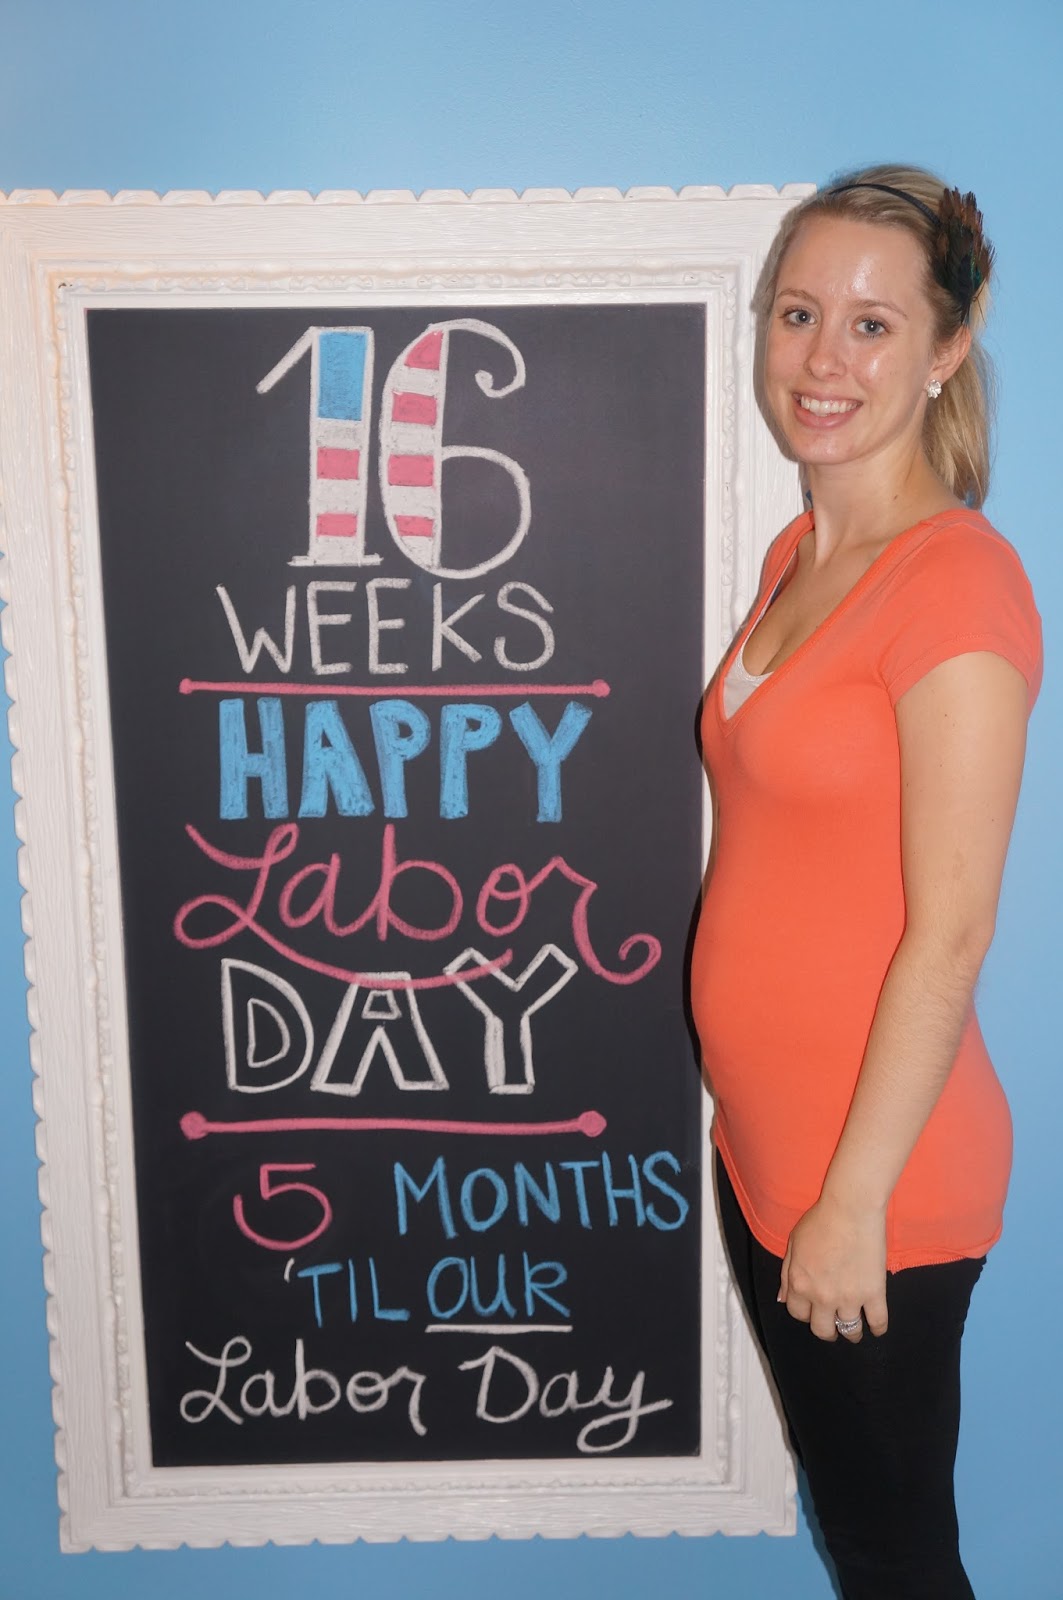 Life After I Do: 16 Weeks! Happy Labor Day!1063 x 1600